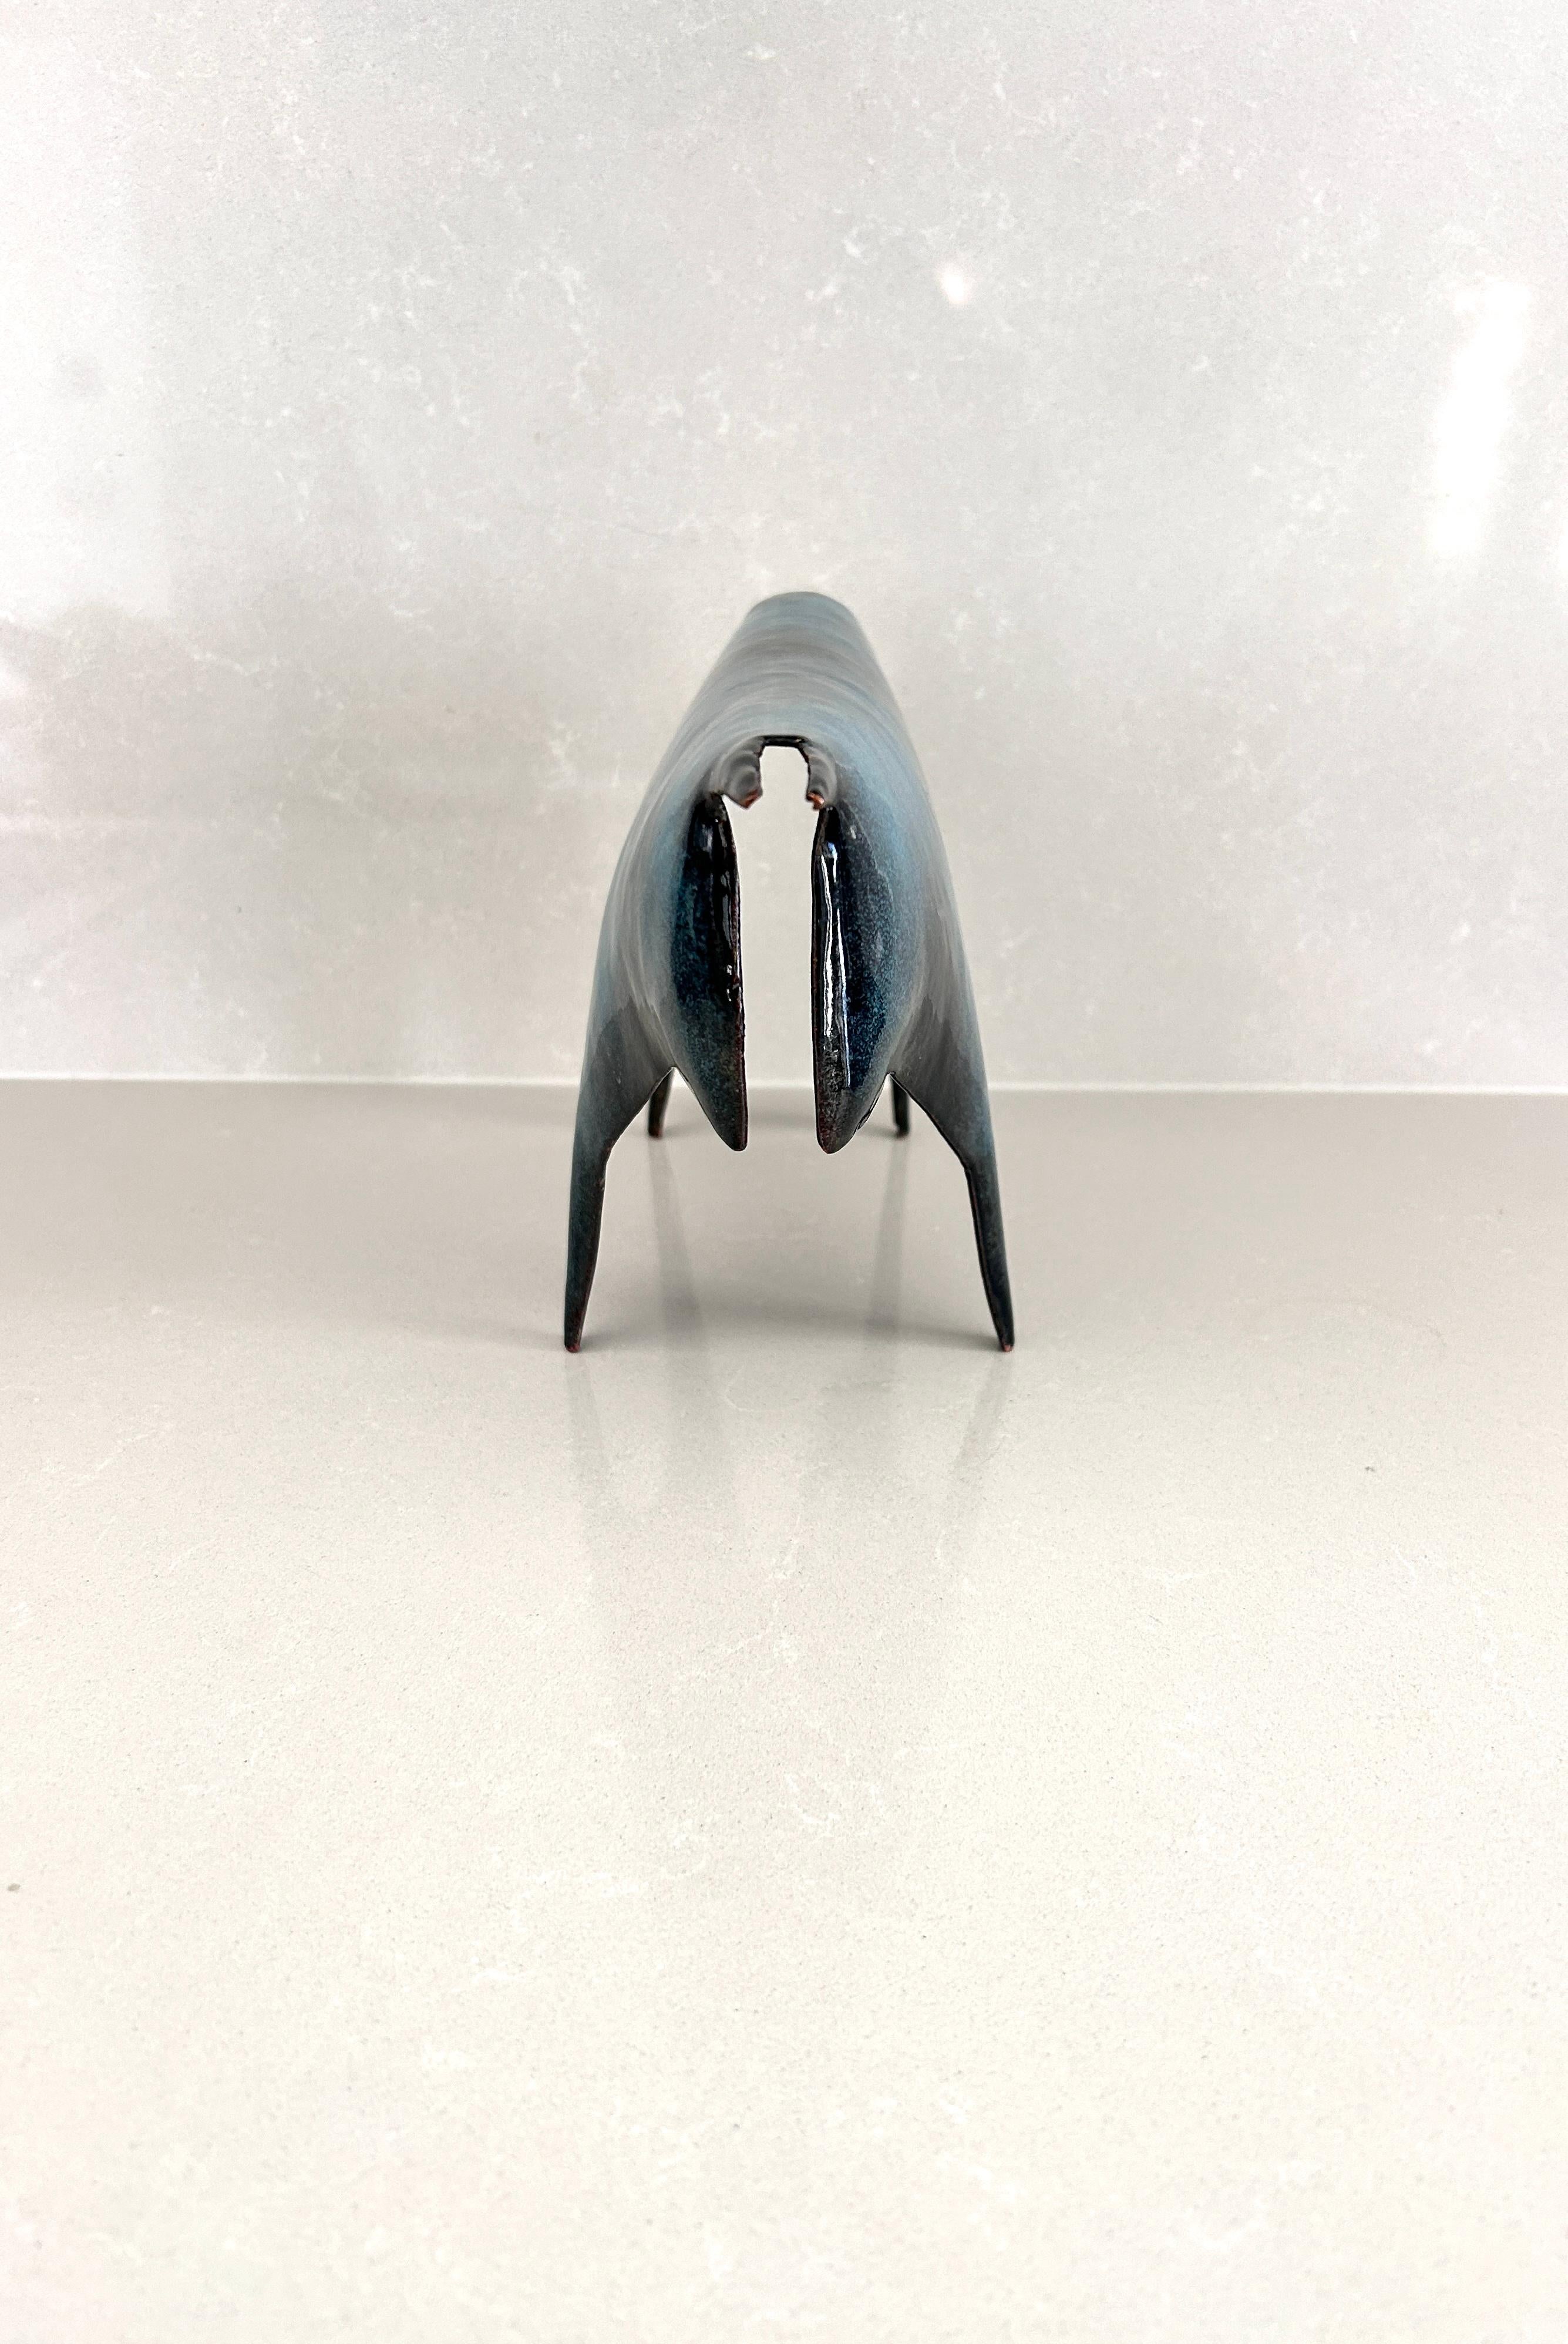 Mid-20th Century Very rare Taurus-shaped sculpture by Gio Ponti for De Poli, 1950s For Sale